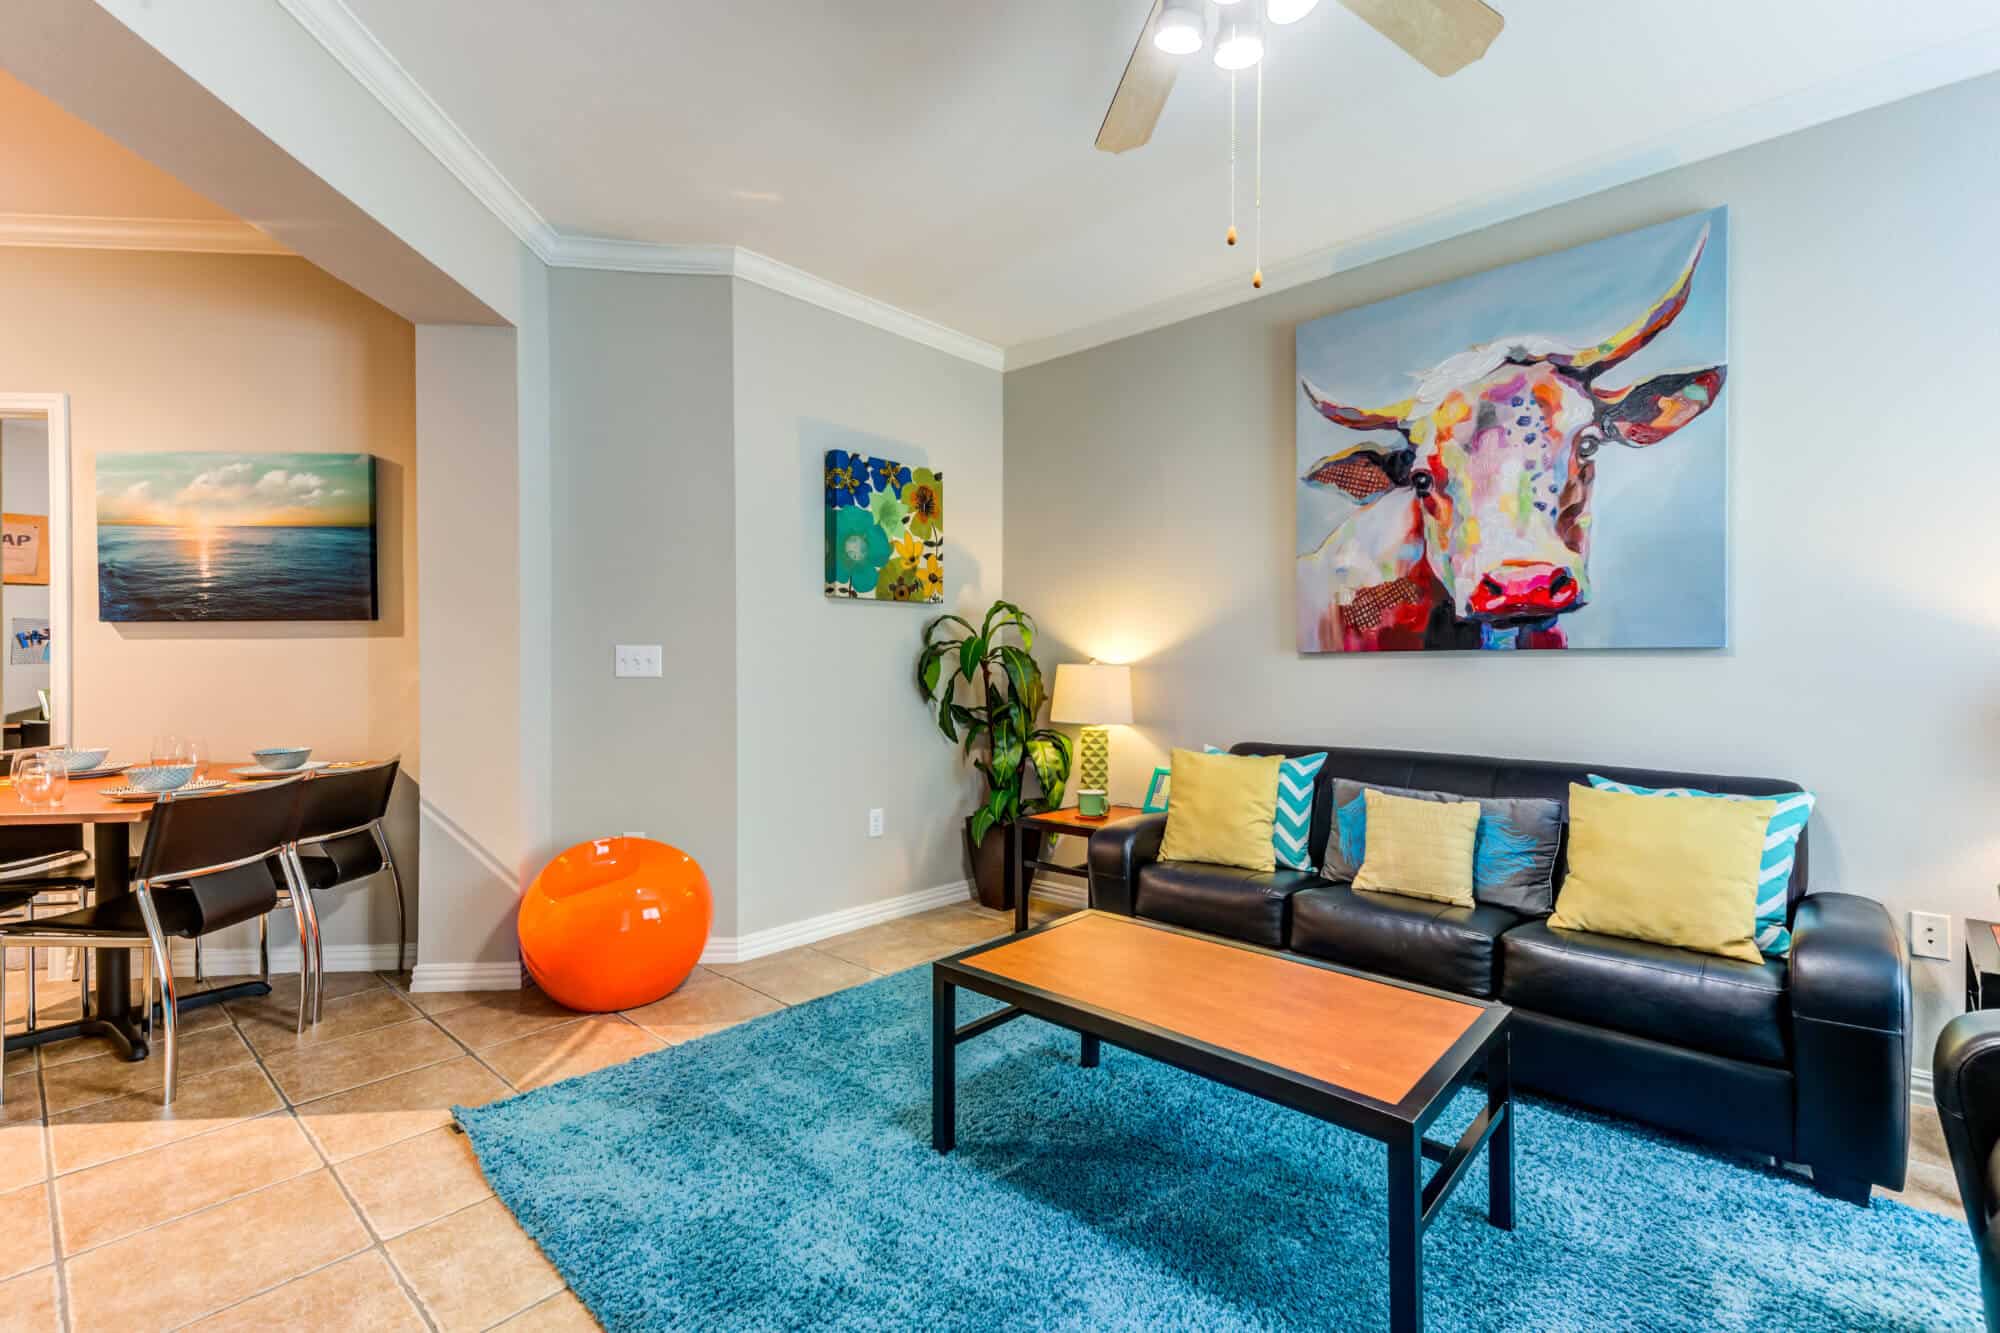 villas on guadalupe off campus apartments near ut austin living room furnished options available